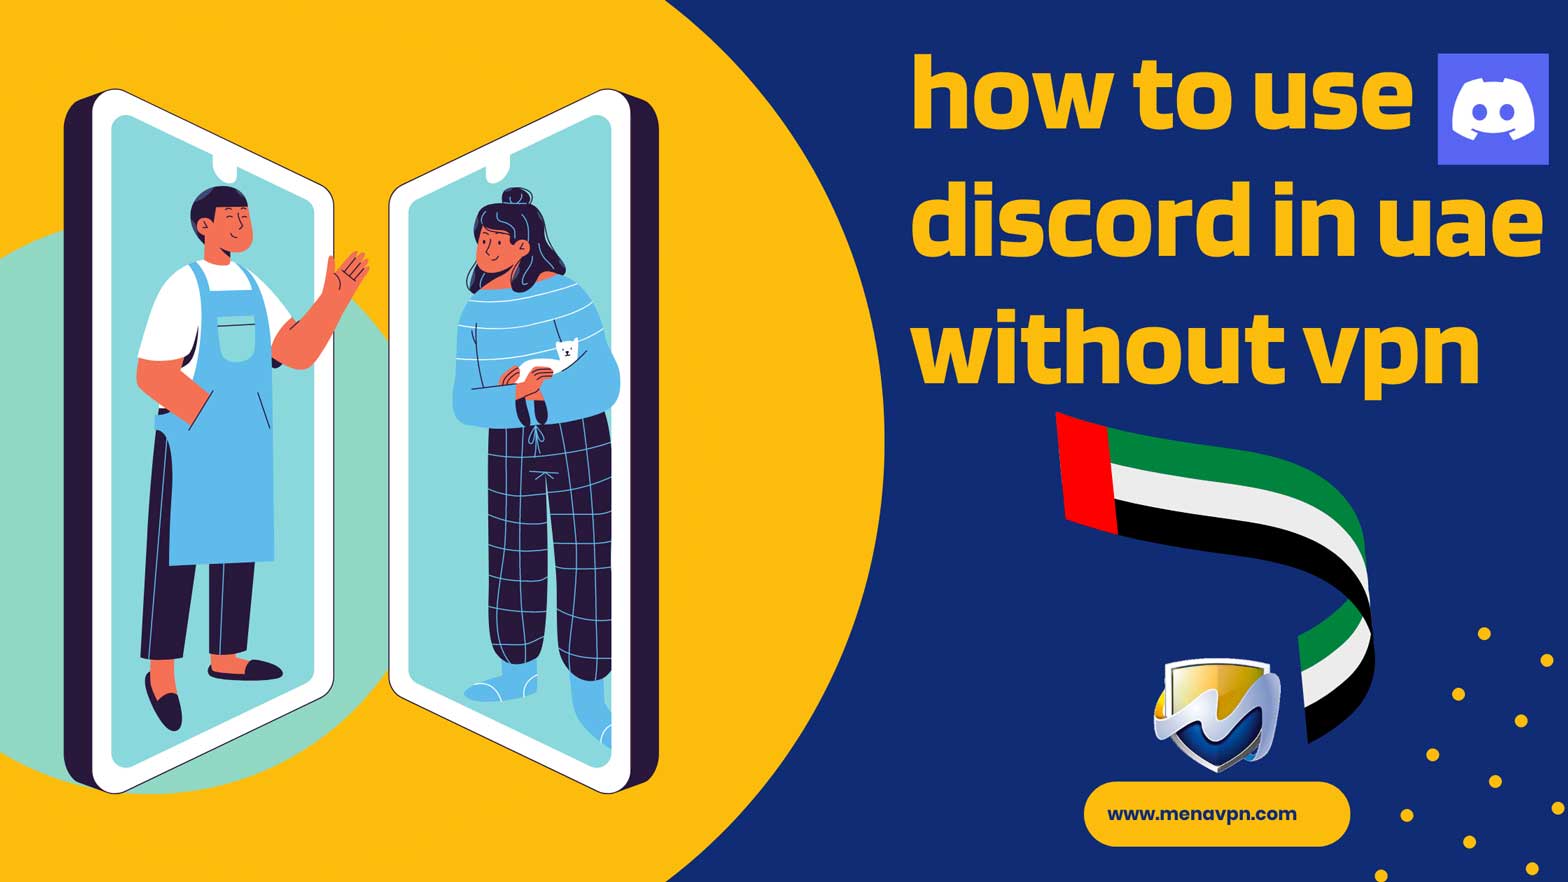 How To Use Discord App In UAE Without VPN